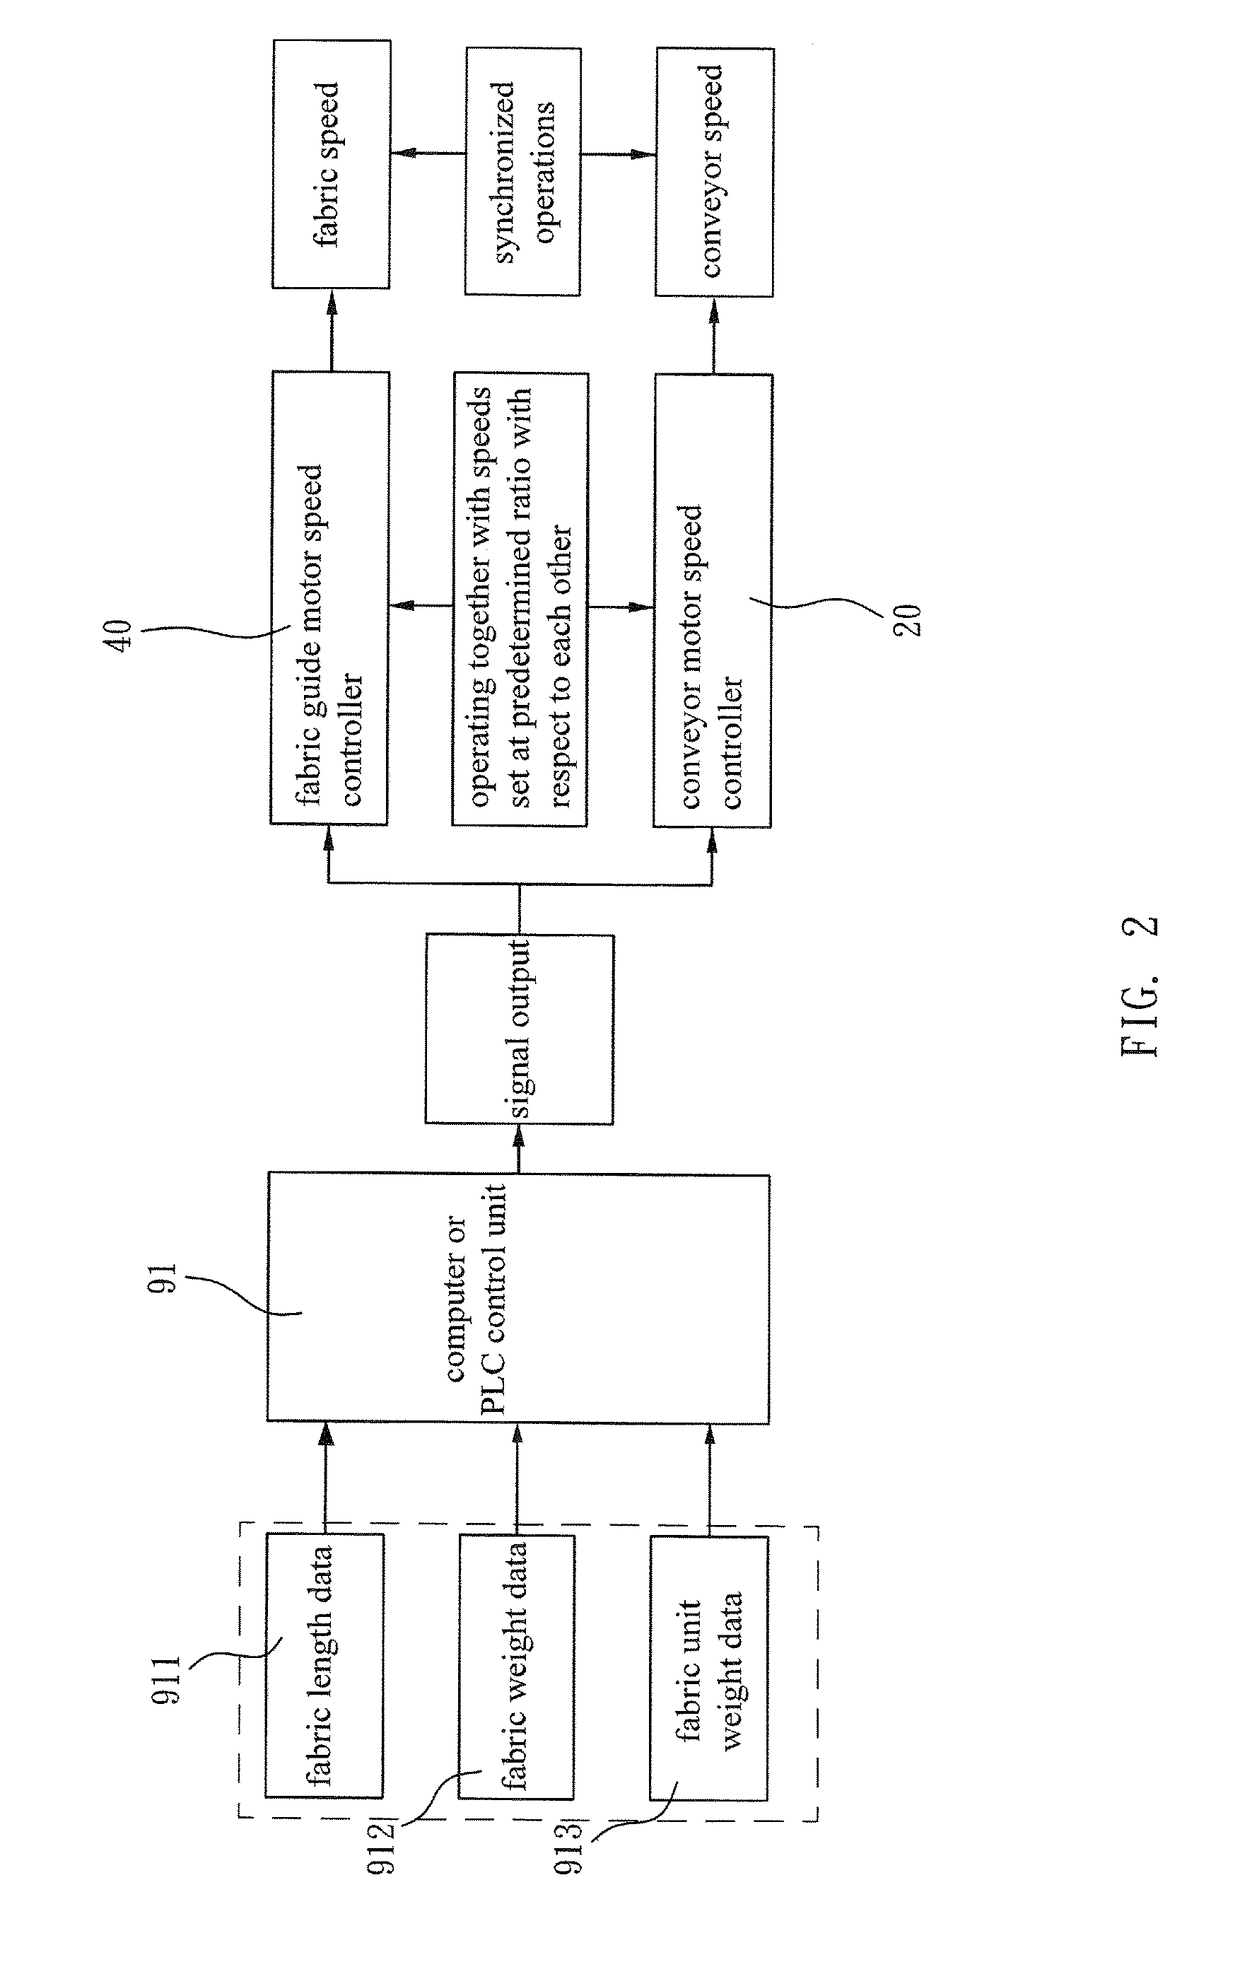 Control method for synchronized fabric circulation in conveyor drive fabric dyeing machine